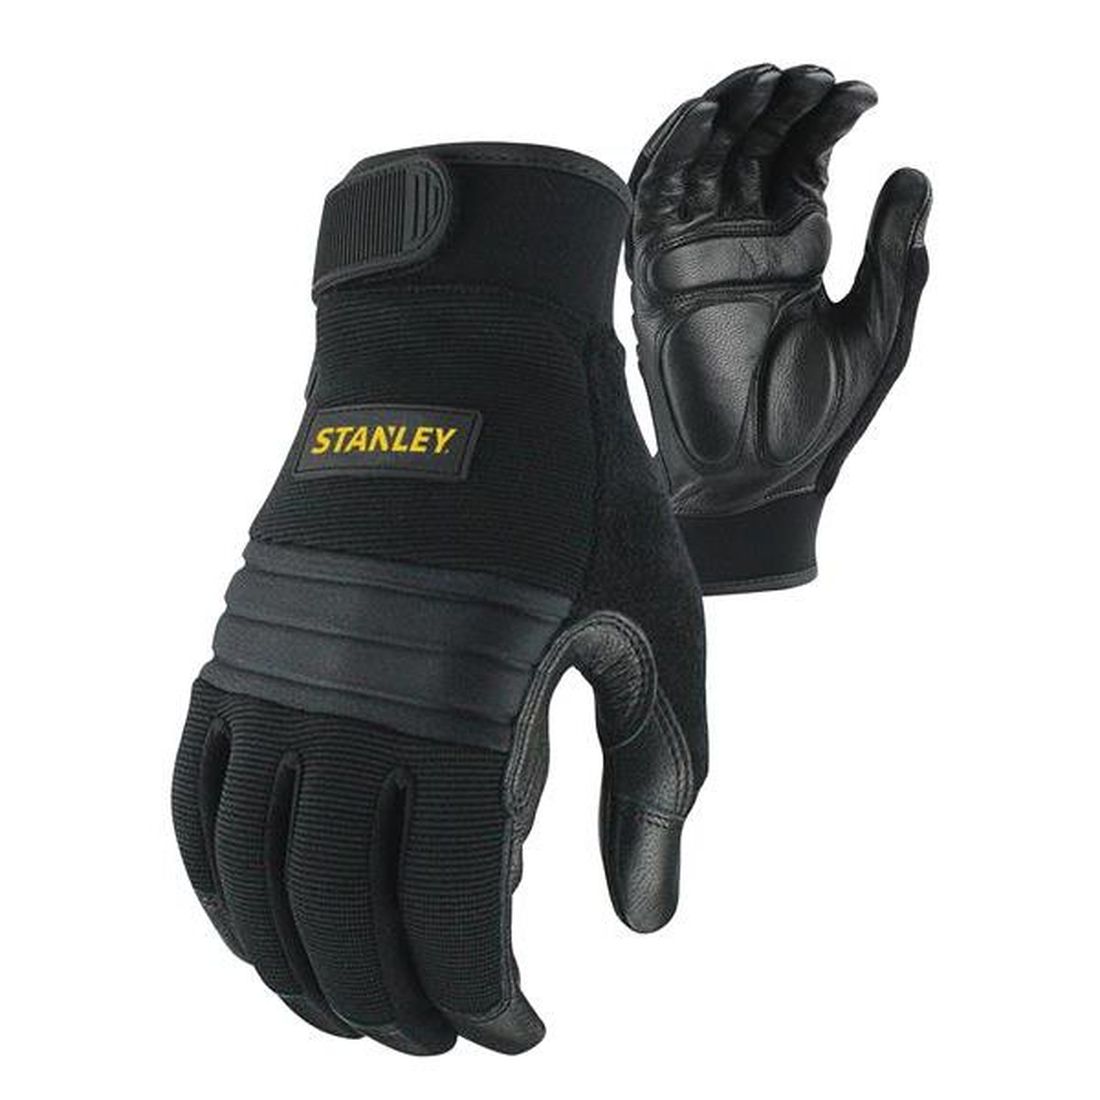 STANLEY SY800 Vibration Reducing Performance Gloves - Large                             